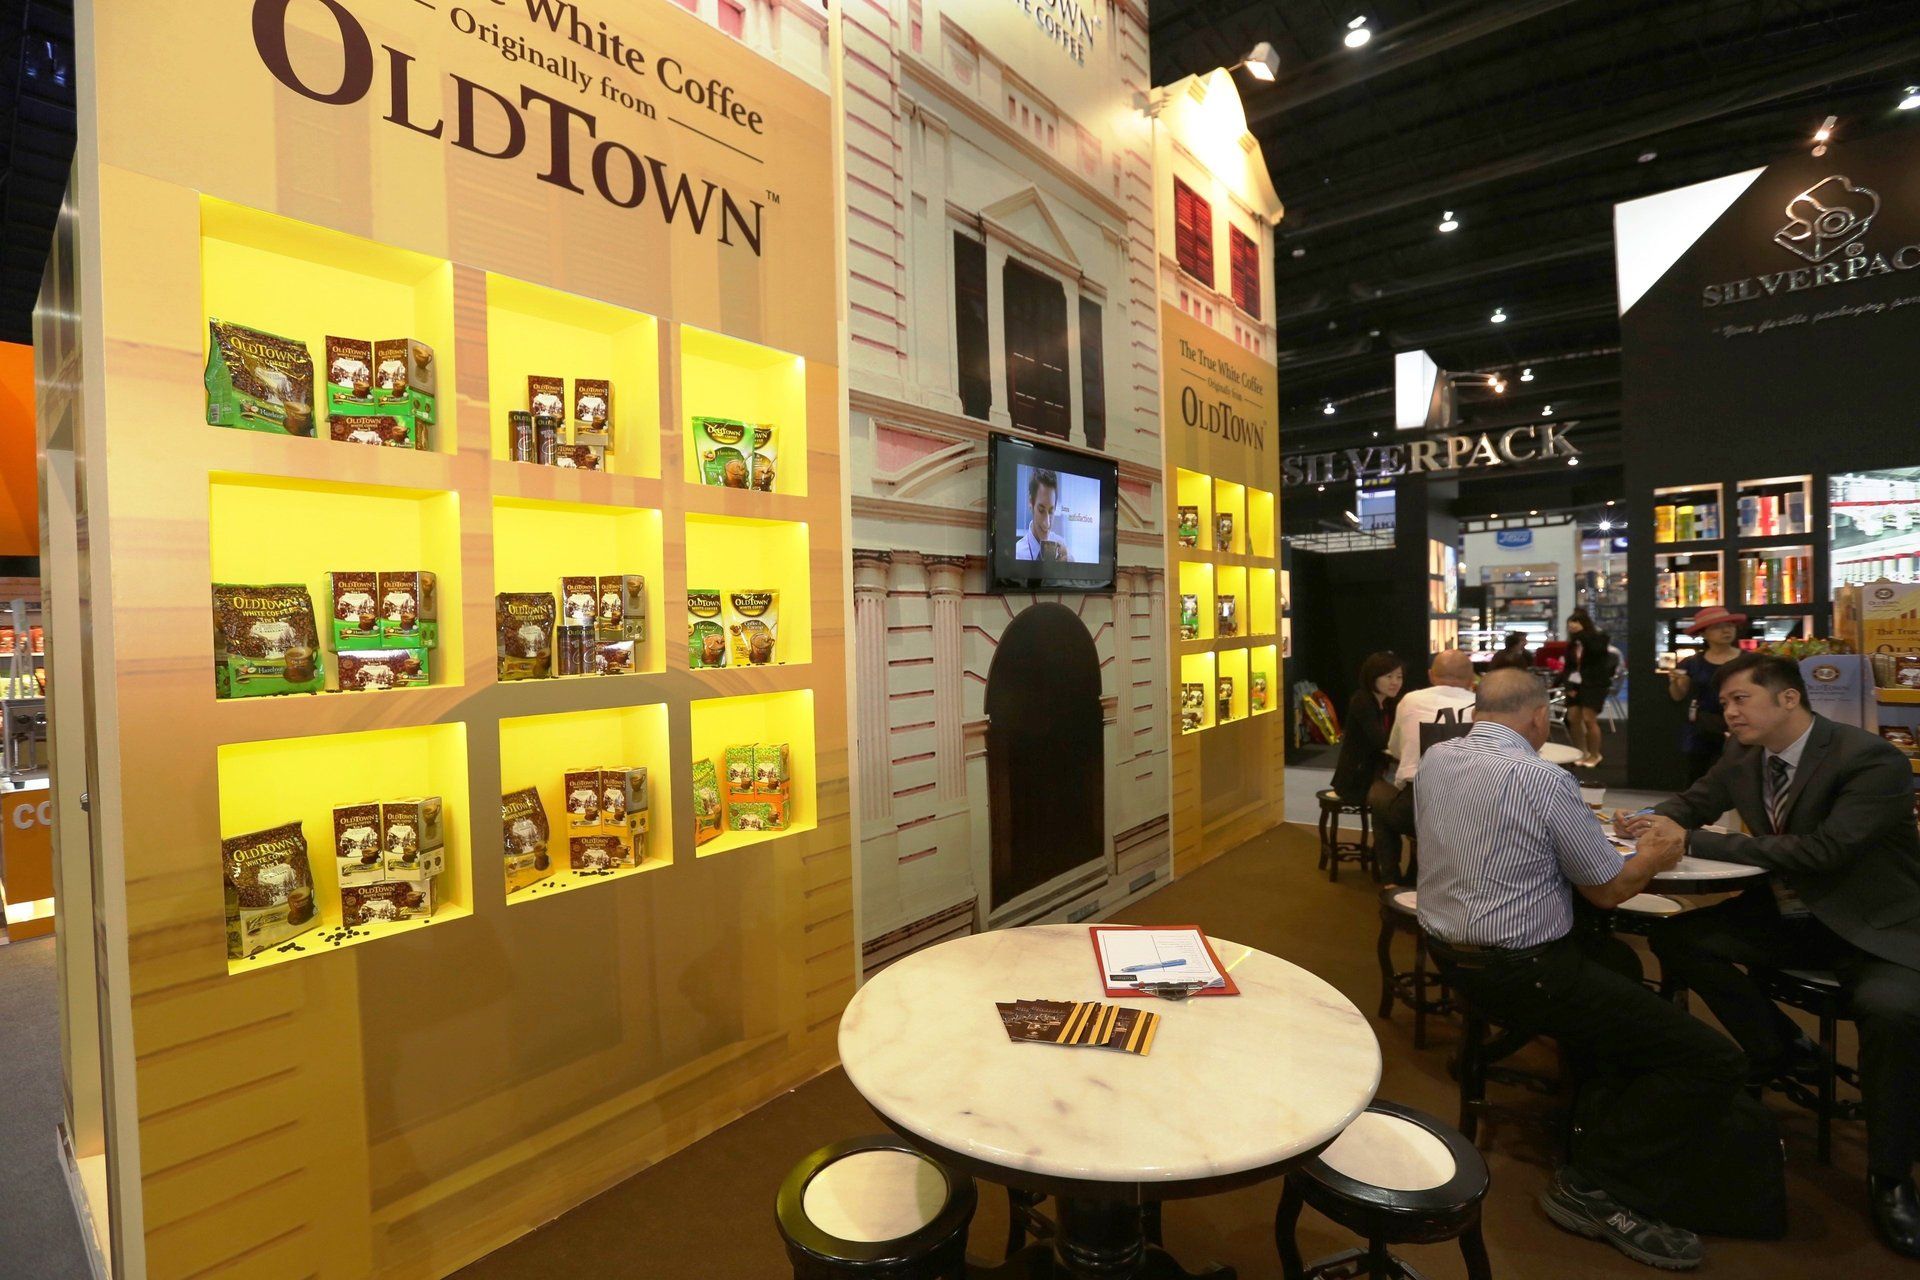 Oldtown Coffee @ Thaifex 2014. Booth designed and built by Essential Global Fairs.